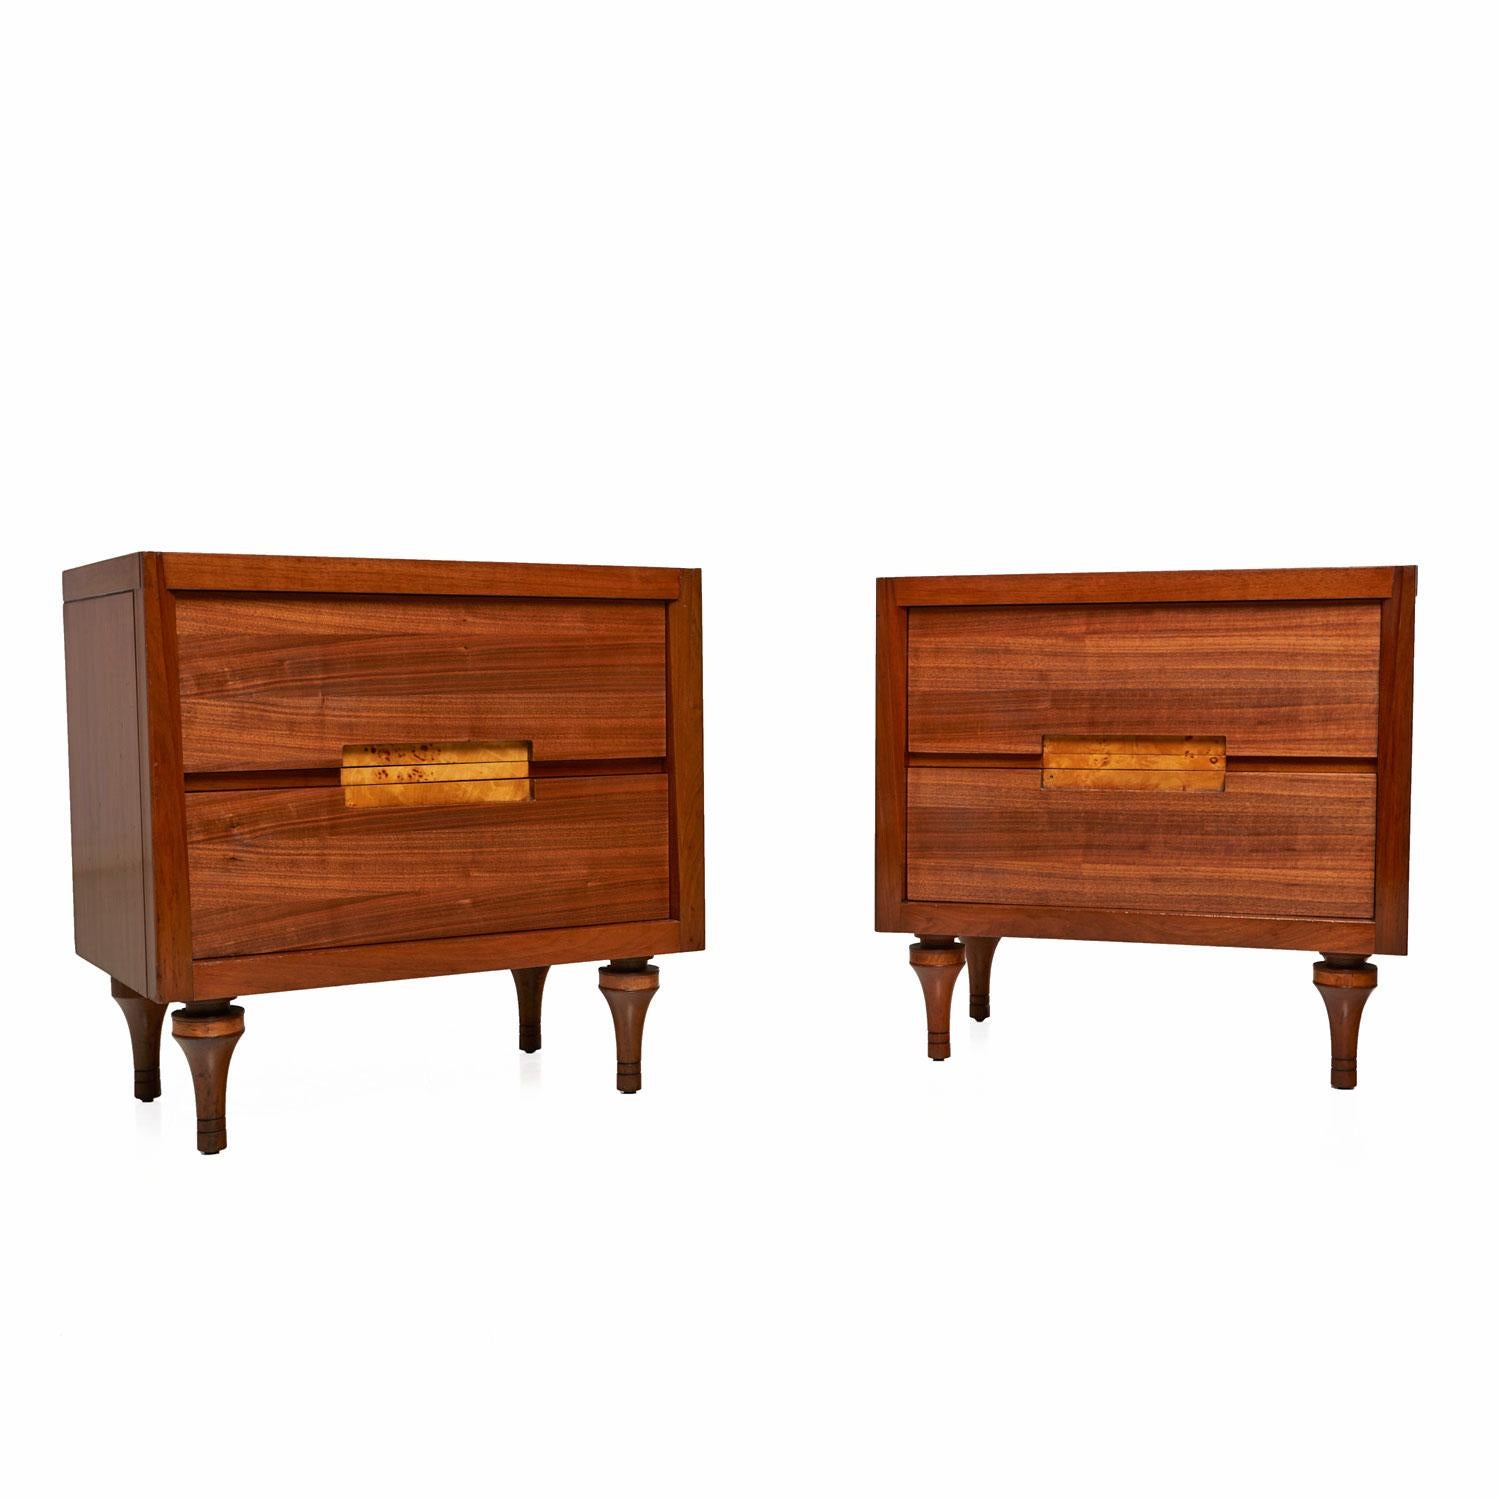 These exquisite nightstand end tables are as beautiful and rare as they are bizarre. Made in the 1960s by Daniel Jones Inc. of New York. We've never seen a line with such exceptional detail and eclectic design elements. Made from a mix of solid